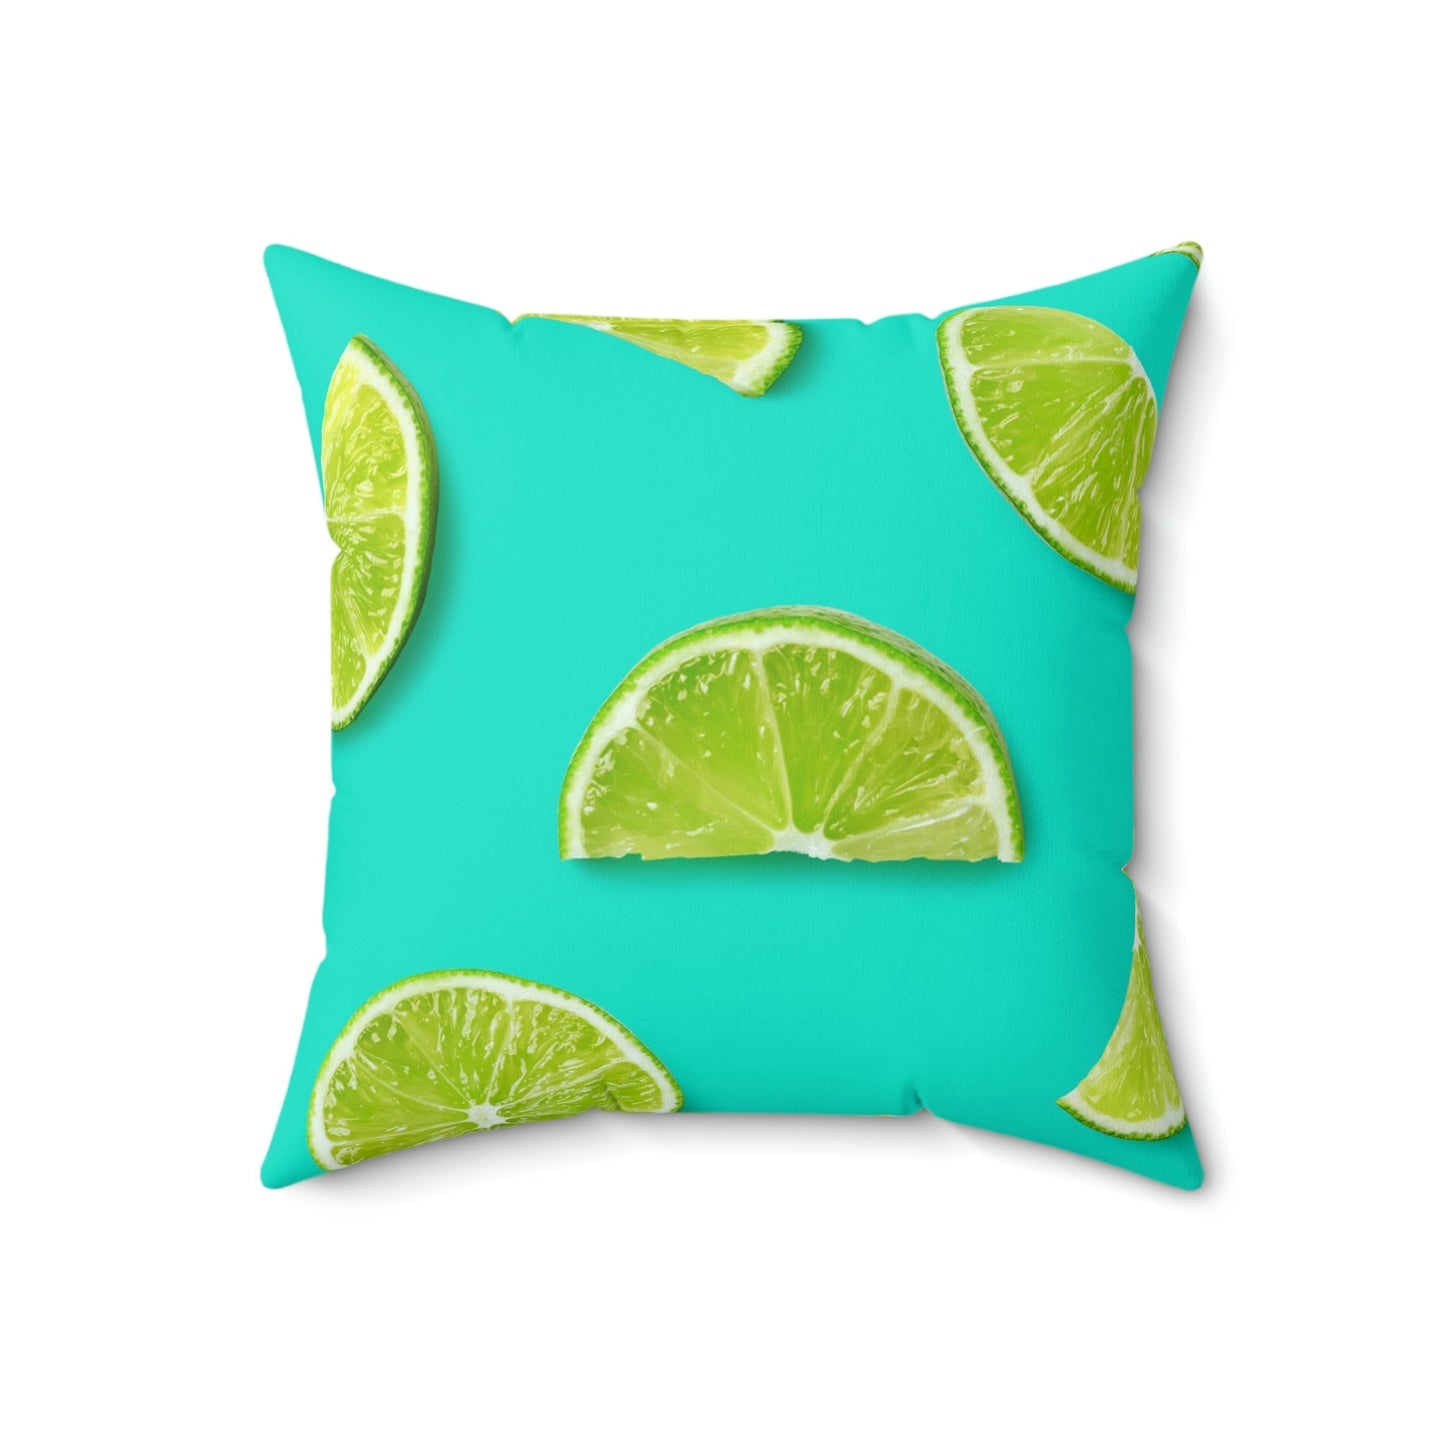 Limes for Margaritas Square Pillow Home Decor Pink Sweetheart